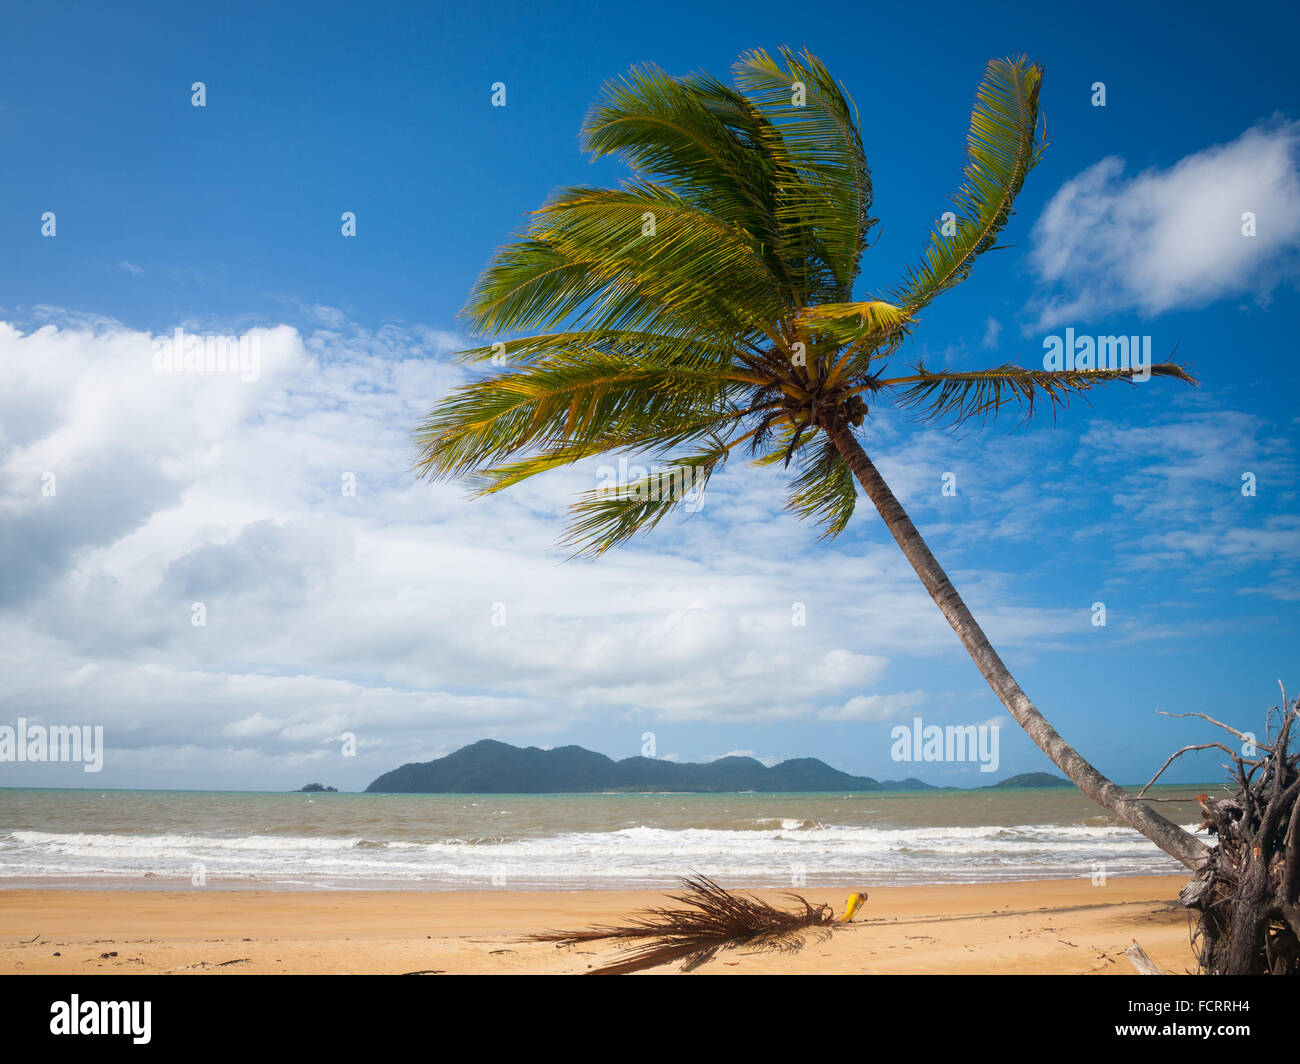 A view of the brilliant beach at South Mission Beach, Queensland, Australia. Dunk Island is in the distance. Stock Photo